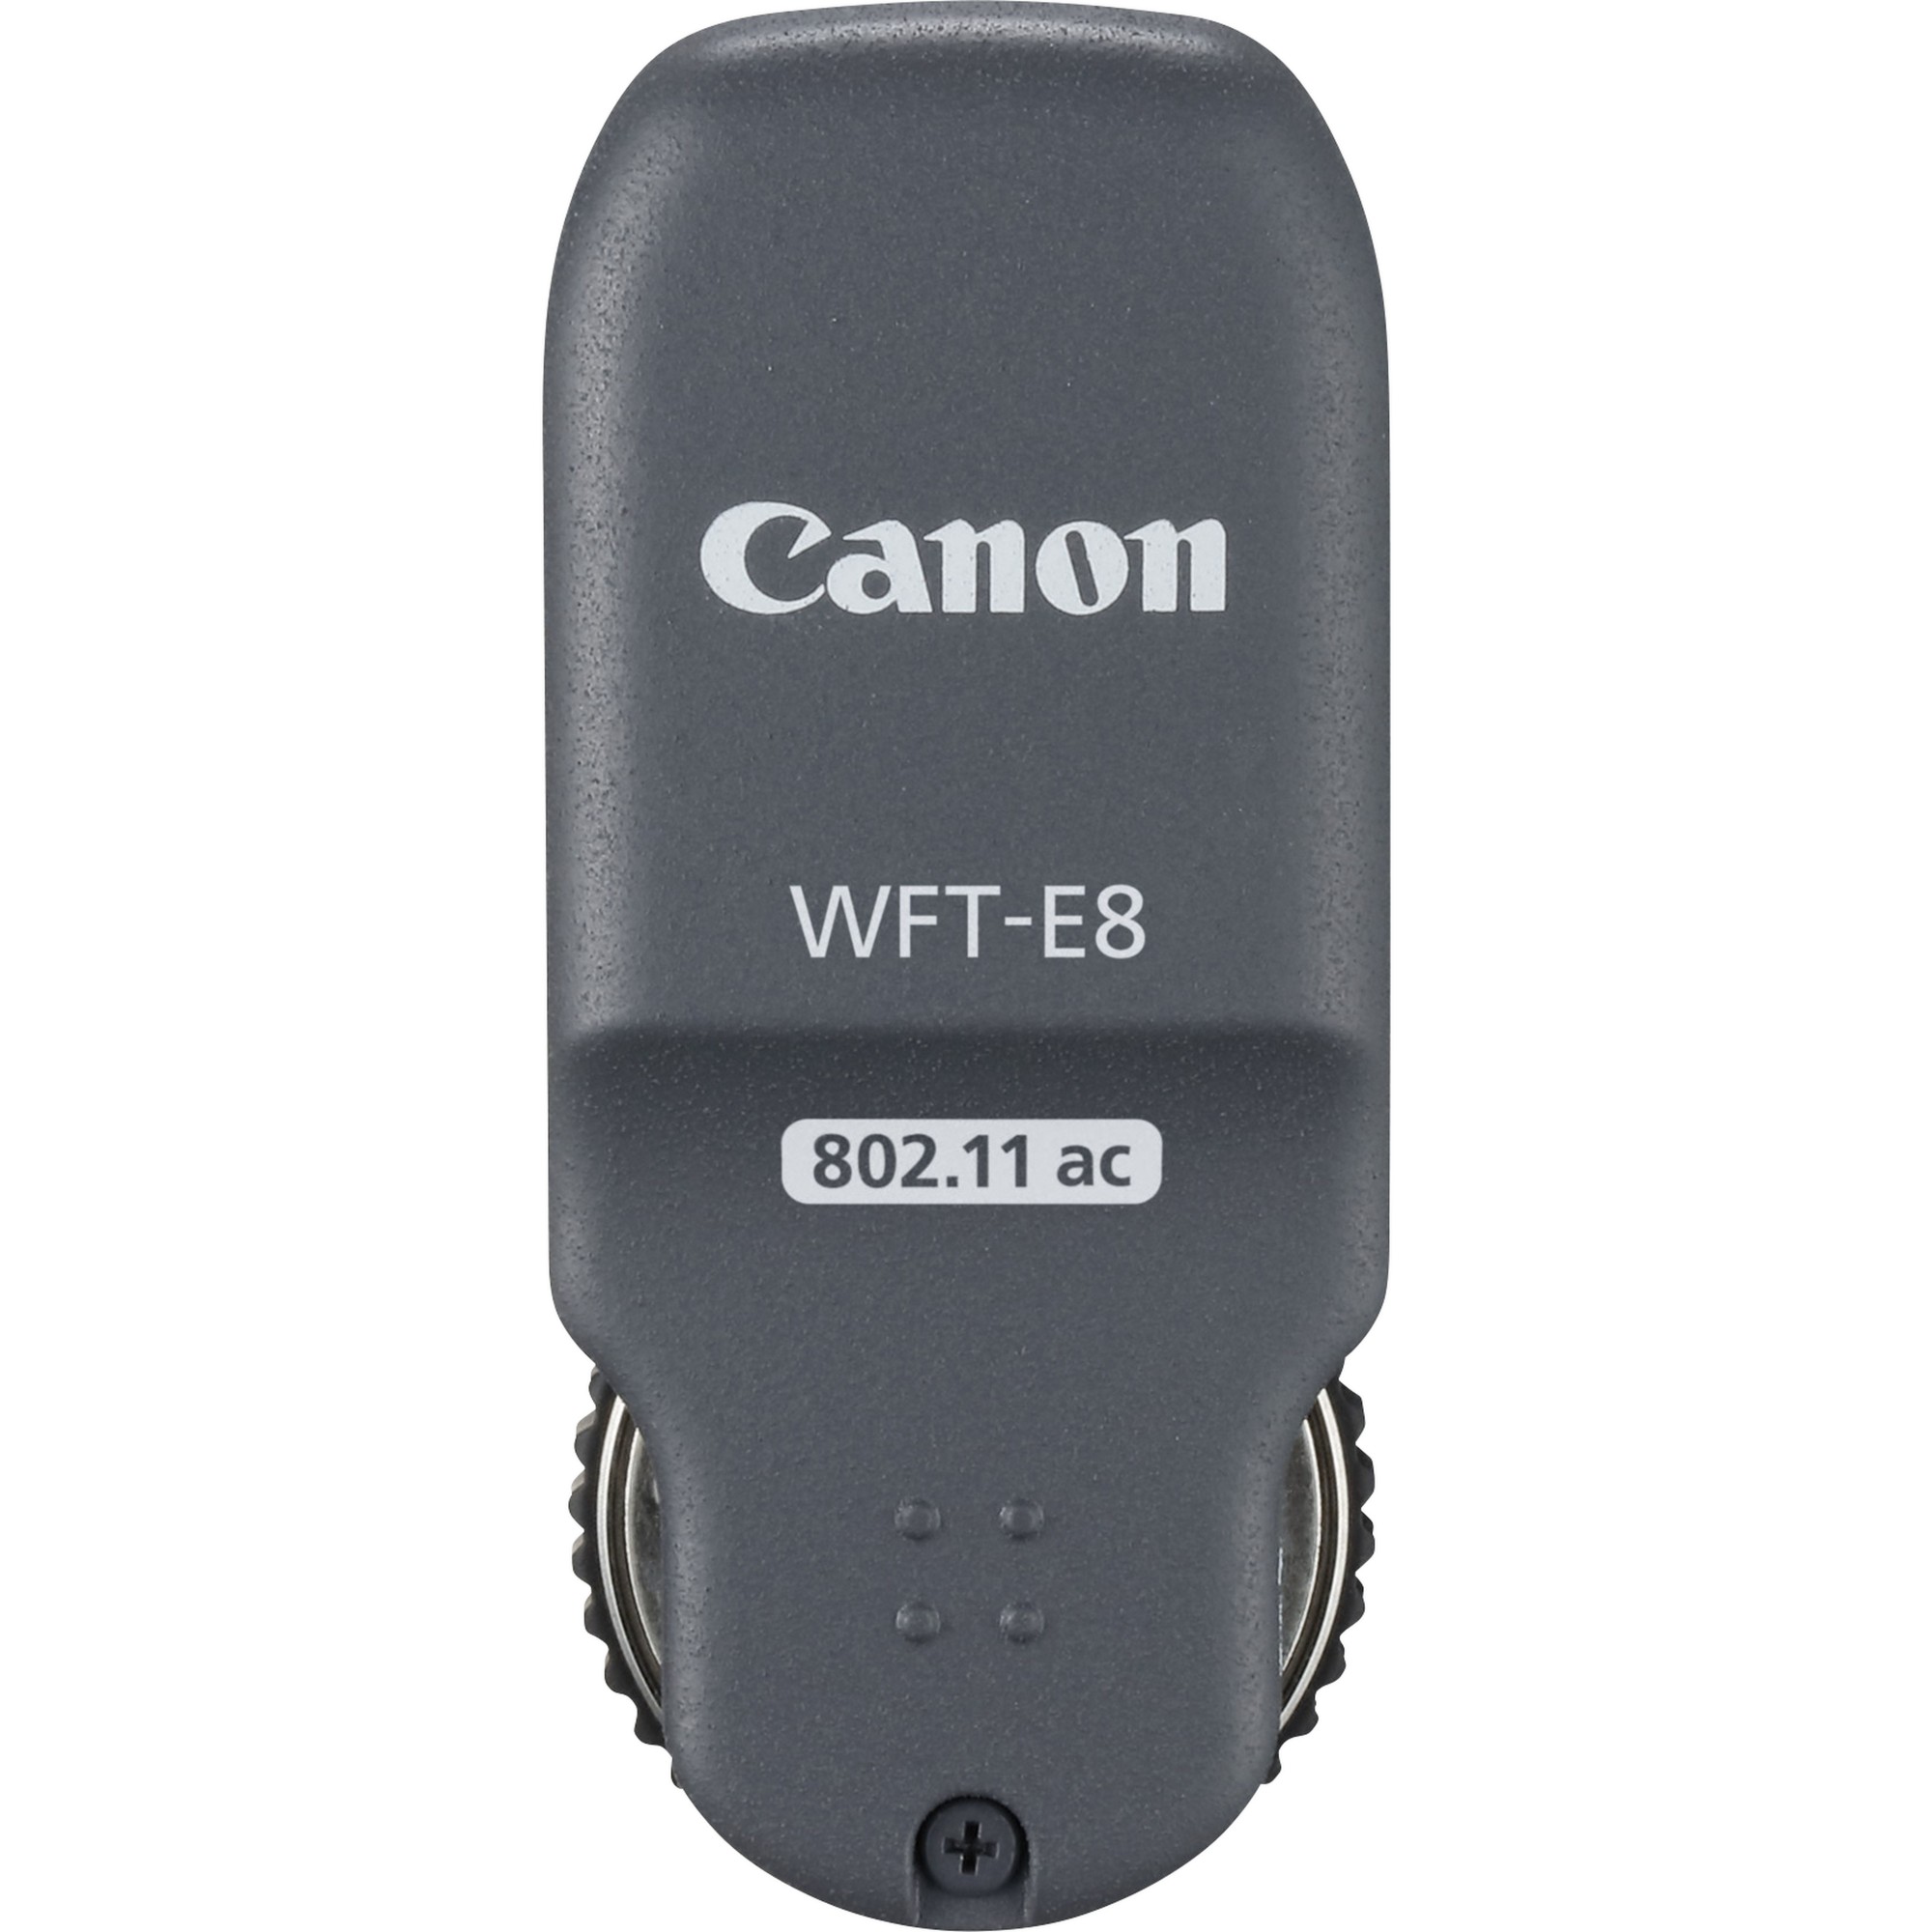 Photos - Other photo accessories Canon WFT-E8B Wireless File Transmitter 1173C007 